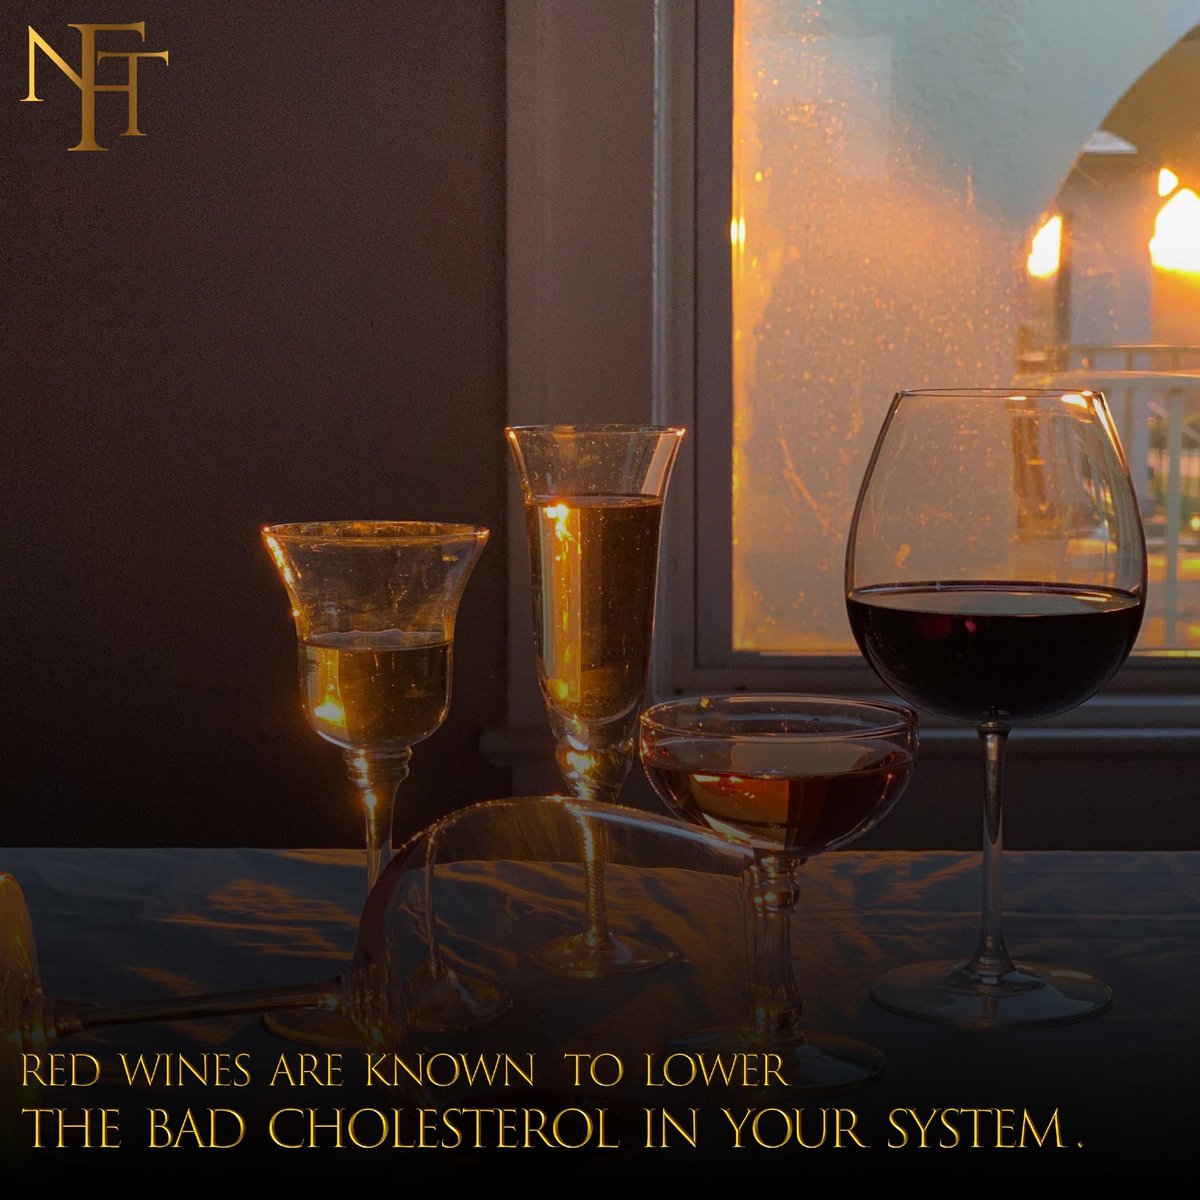 Cheers to good health:

Wine and cholesterol reduction!🍷💪

 #winelover #healthylifestyle

Learn more join.nftwineclub.com

#nftwineclub #winery #winerylove #instawine #vinolove #wine #foodandwine #winetime #spanishwine #winetasting #winoclock #wineblogger #springvibes #wines